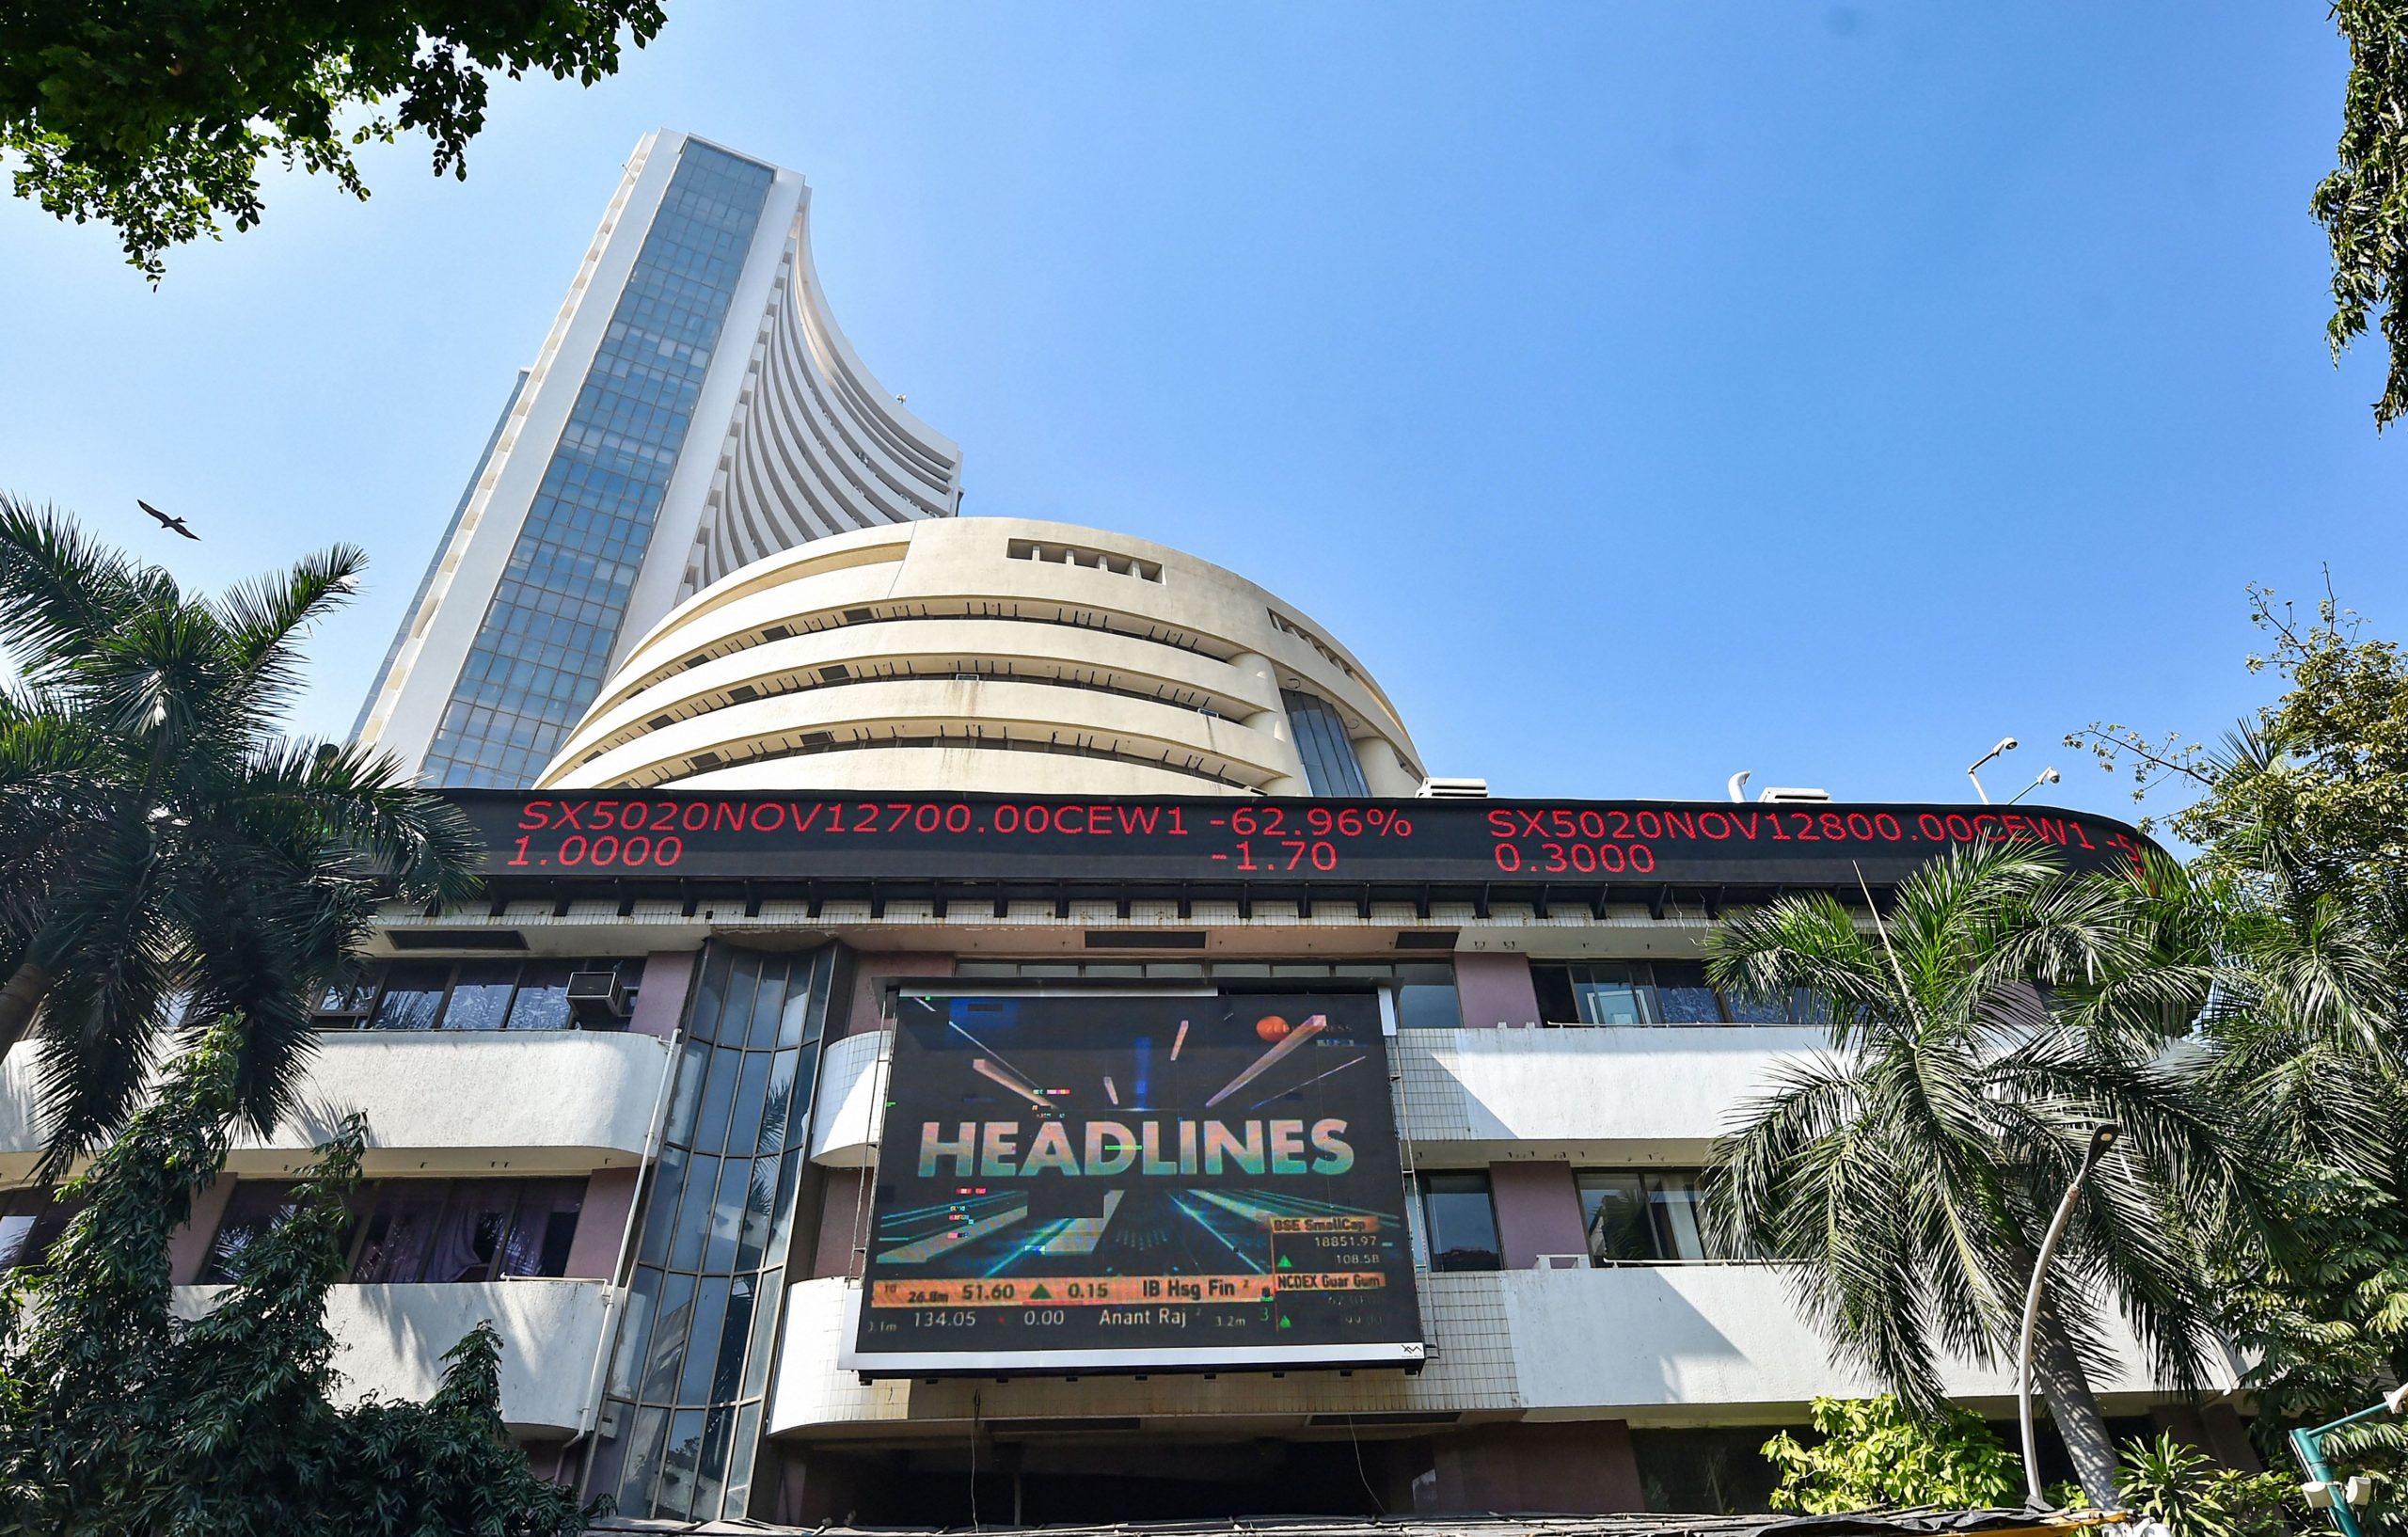 Trending Stocks: LIC, ONGC, Hero MotoCorp and others in news today